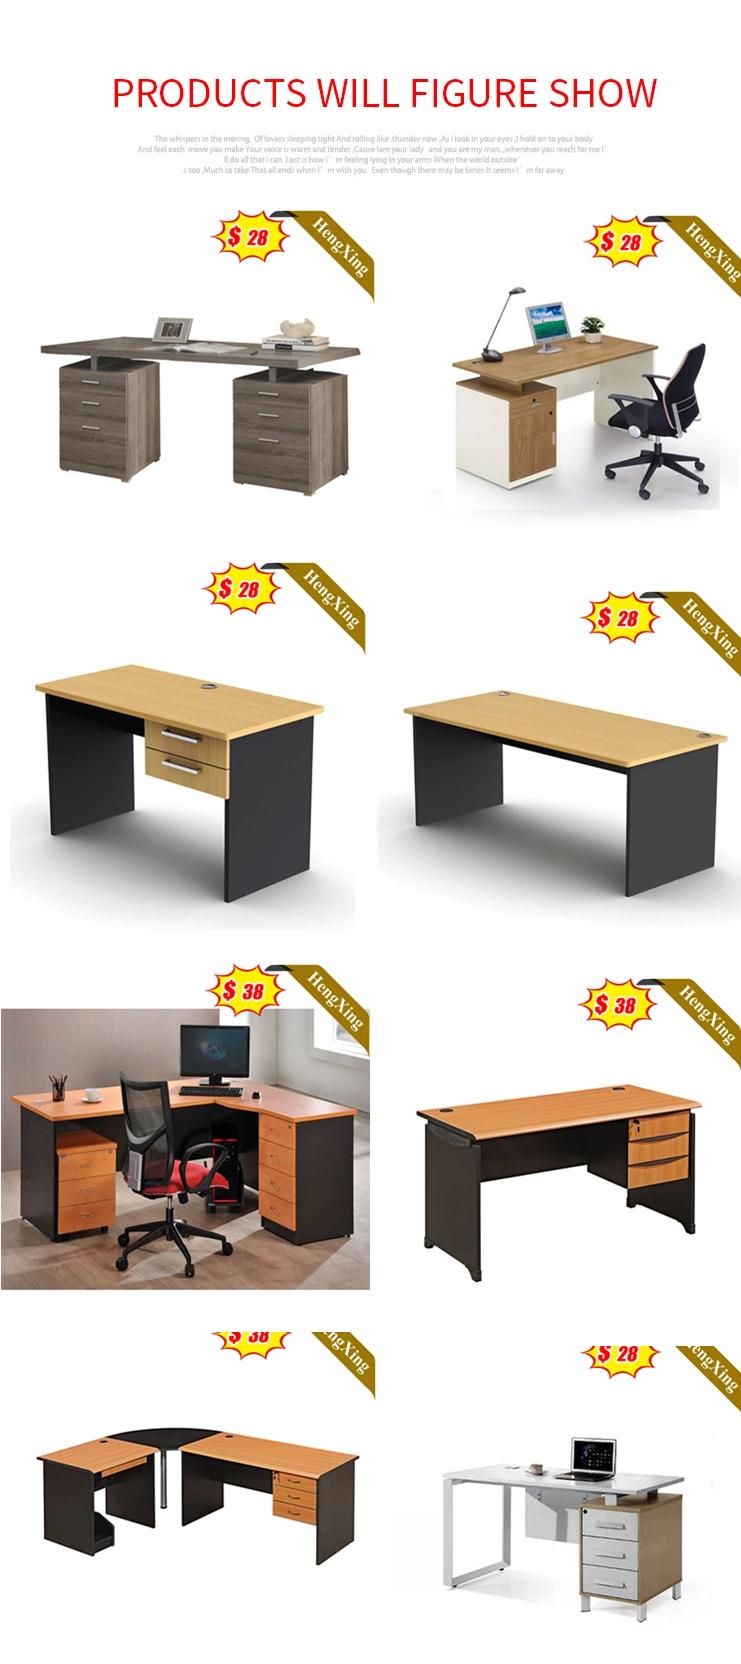 Modern Gaming Design Home Furniture Grey Wooden Computer Table with Drawers Office Desk